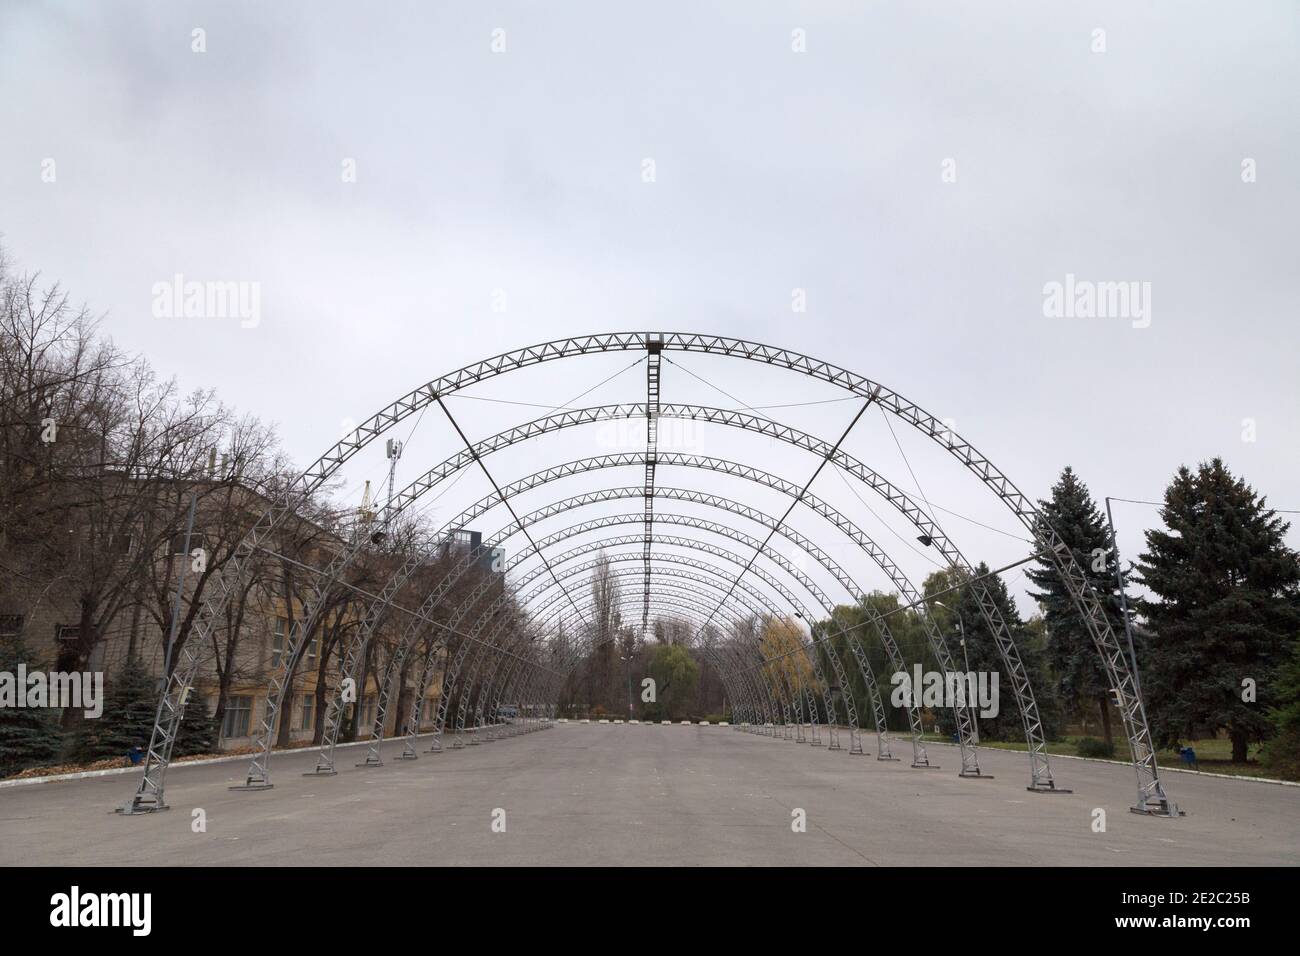 Arched metal frames on the asphalt square. The image shows the central perspective of the arched structure. Stock Photo